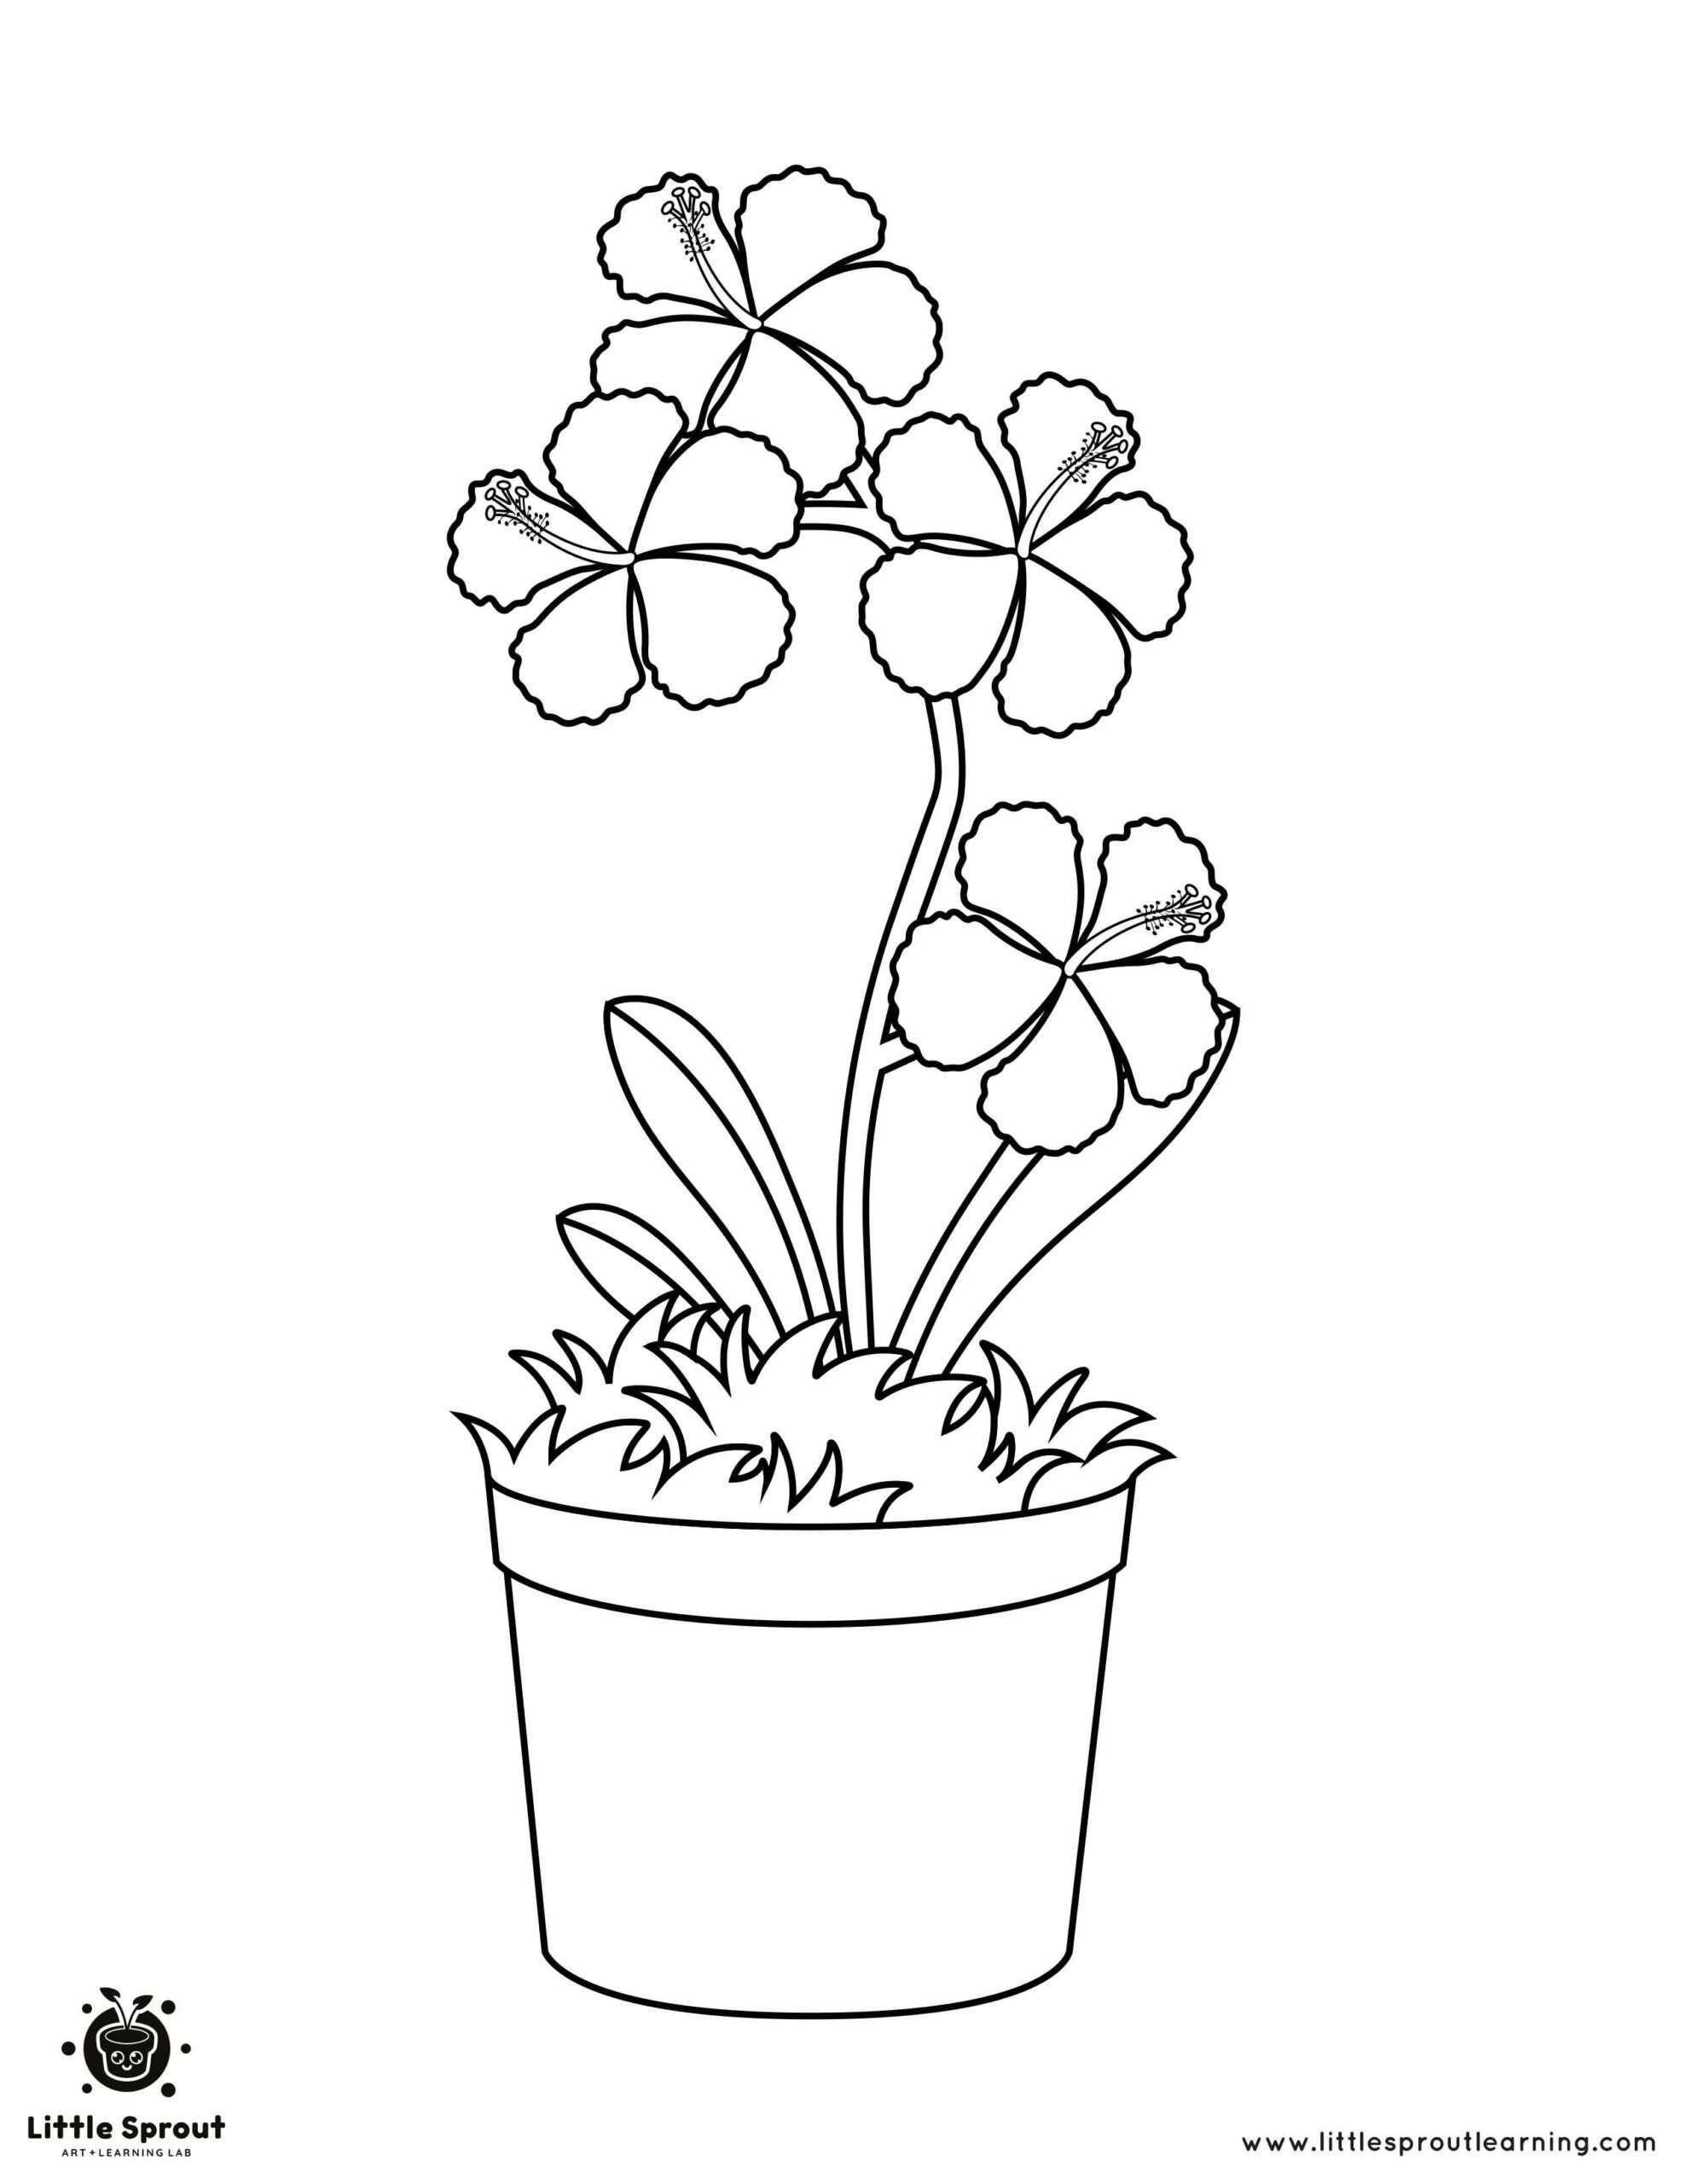 Coloring Page Flower 1 Little Sprout Learning scaled